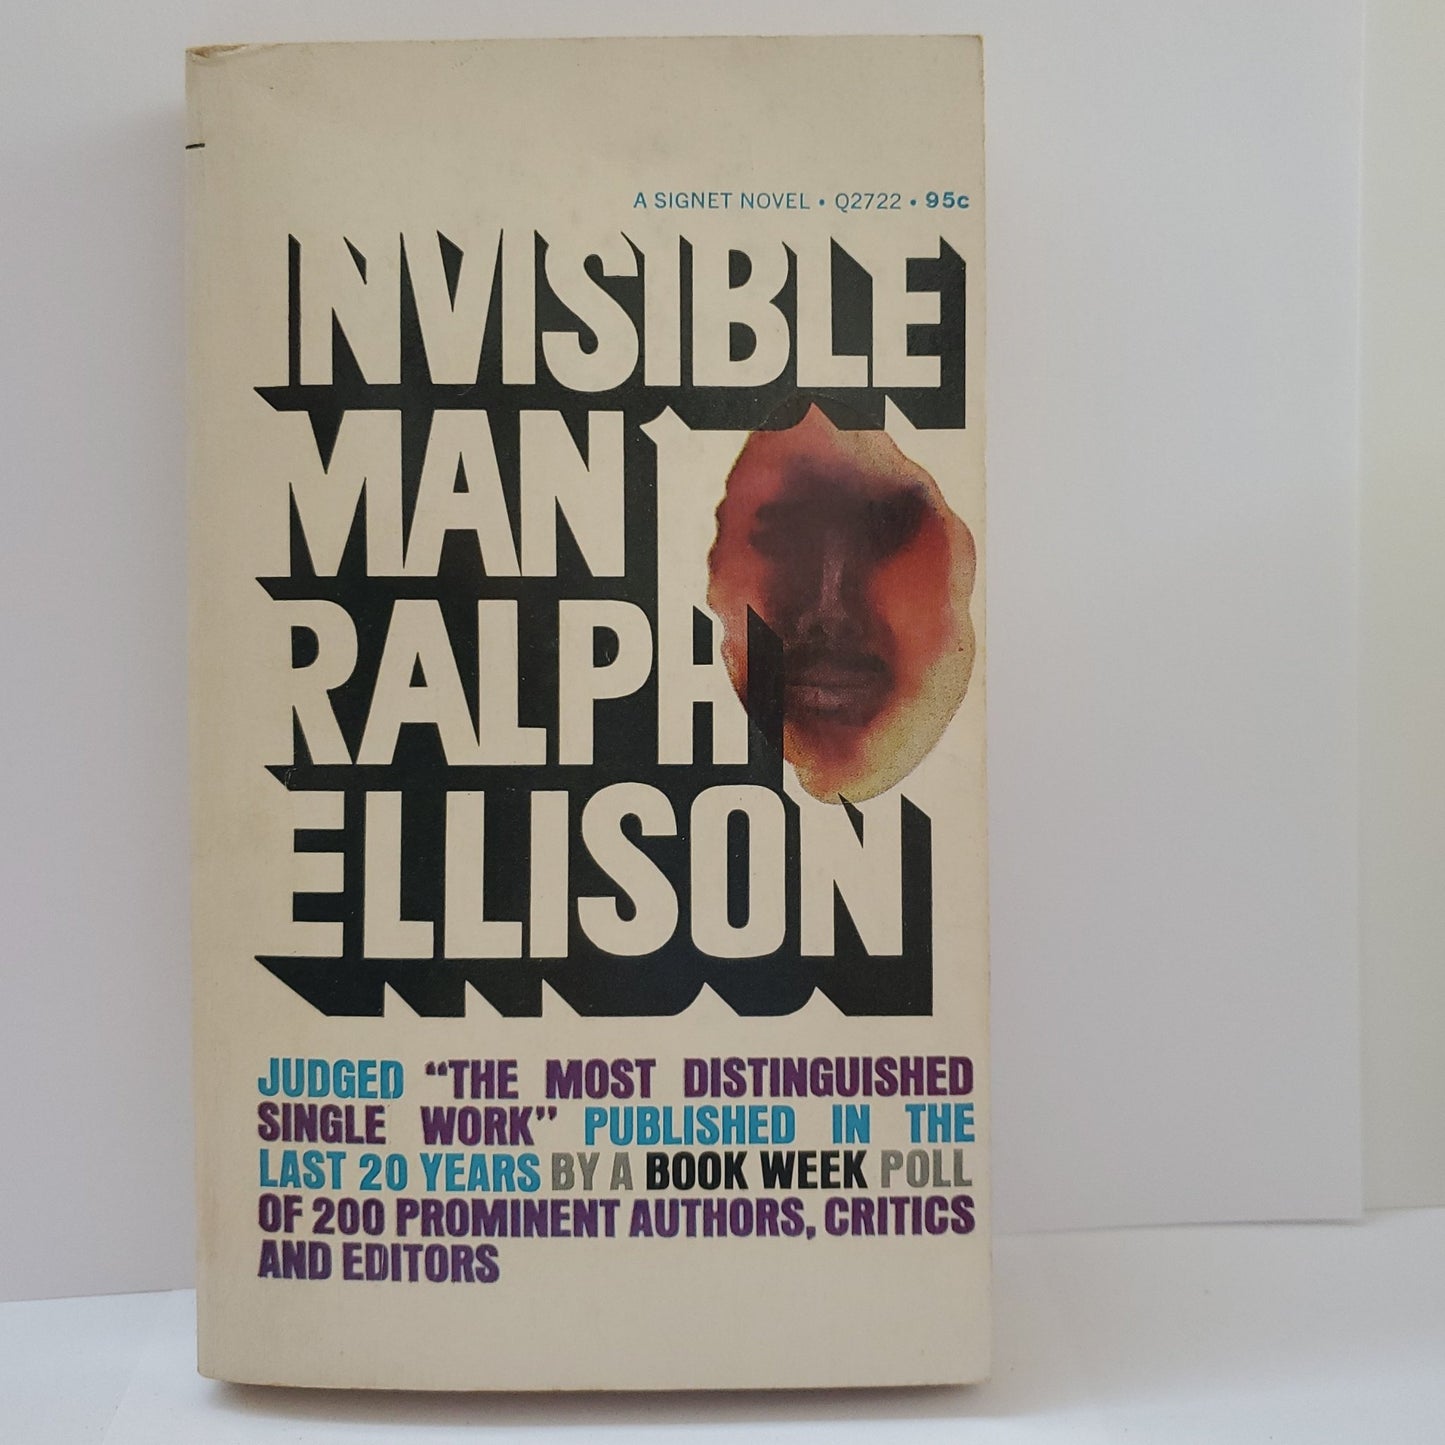 Invisible Man - [ash-ling] Booksellers